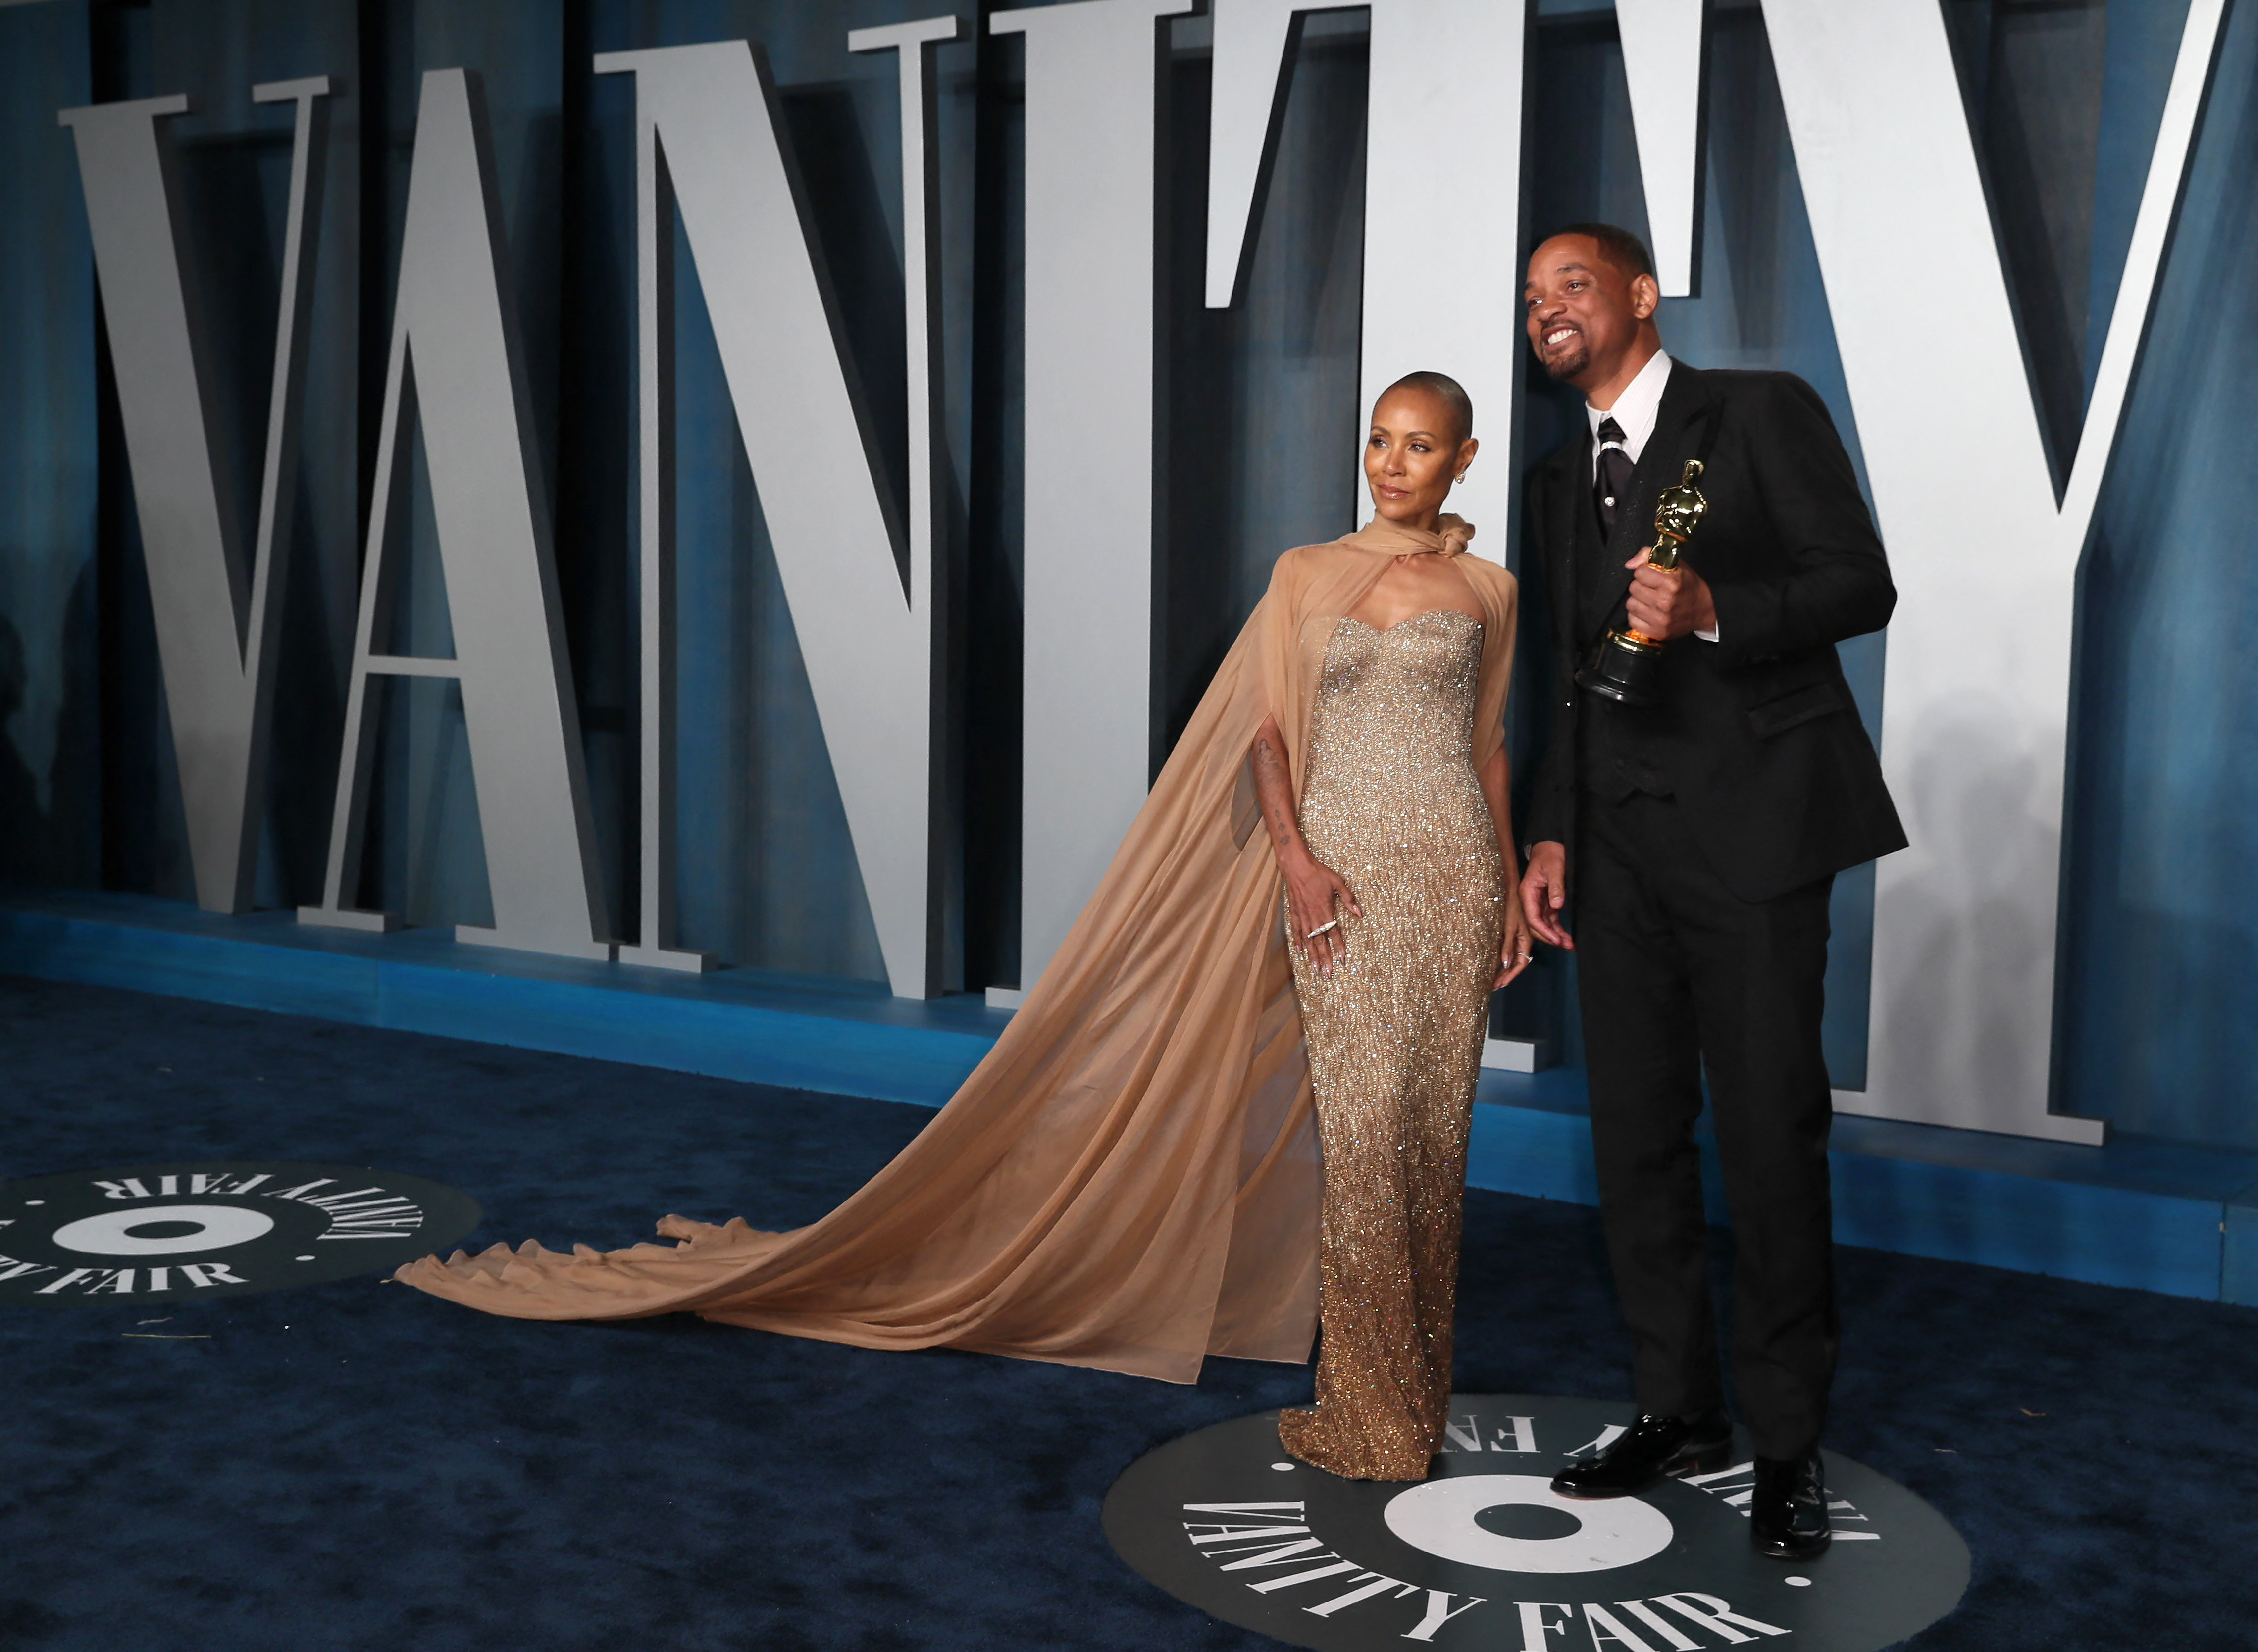 Will Smith and Jada Pinkett Smith at the Vanity Fair party (Reuters)